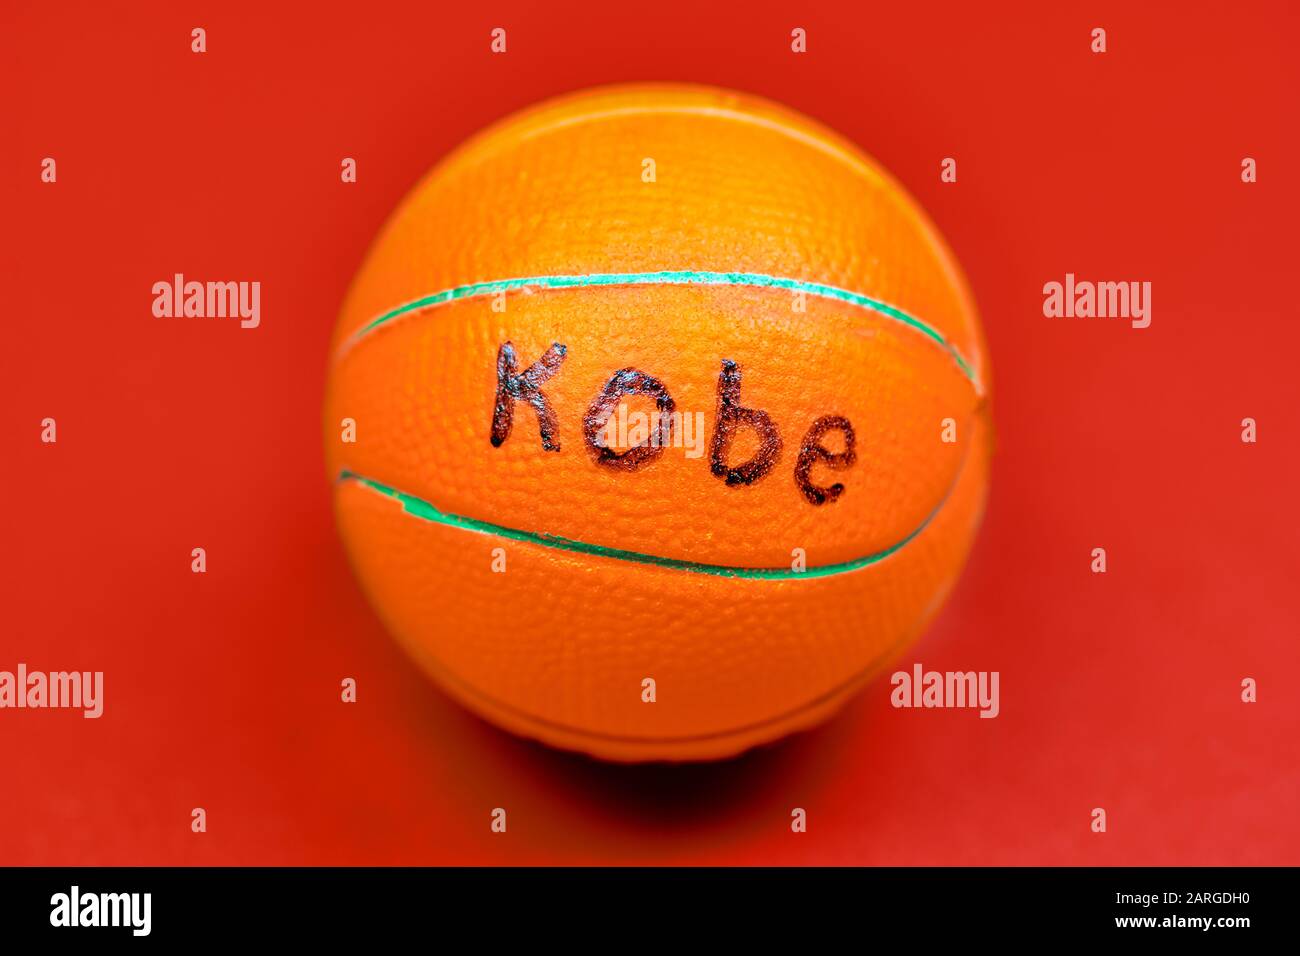 Basketball ball with KOBE text, red background. Famous basketball player concept. Stock Photo